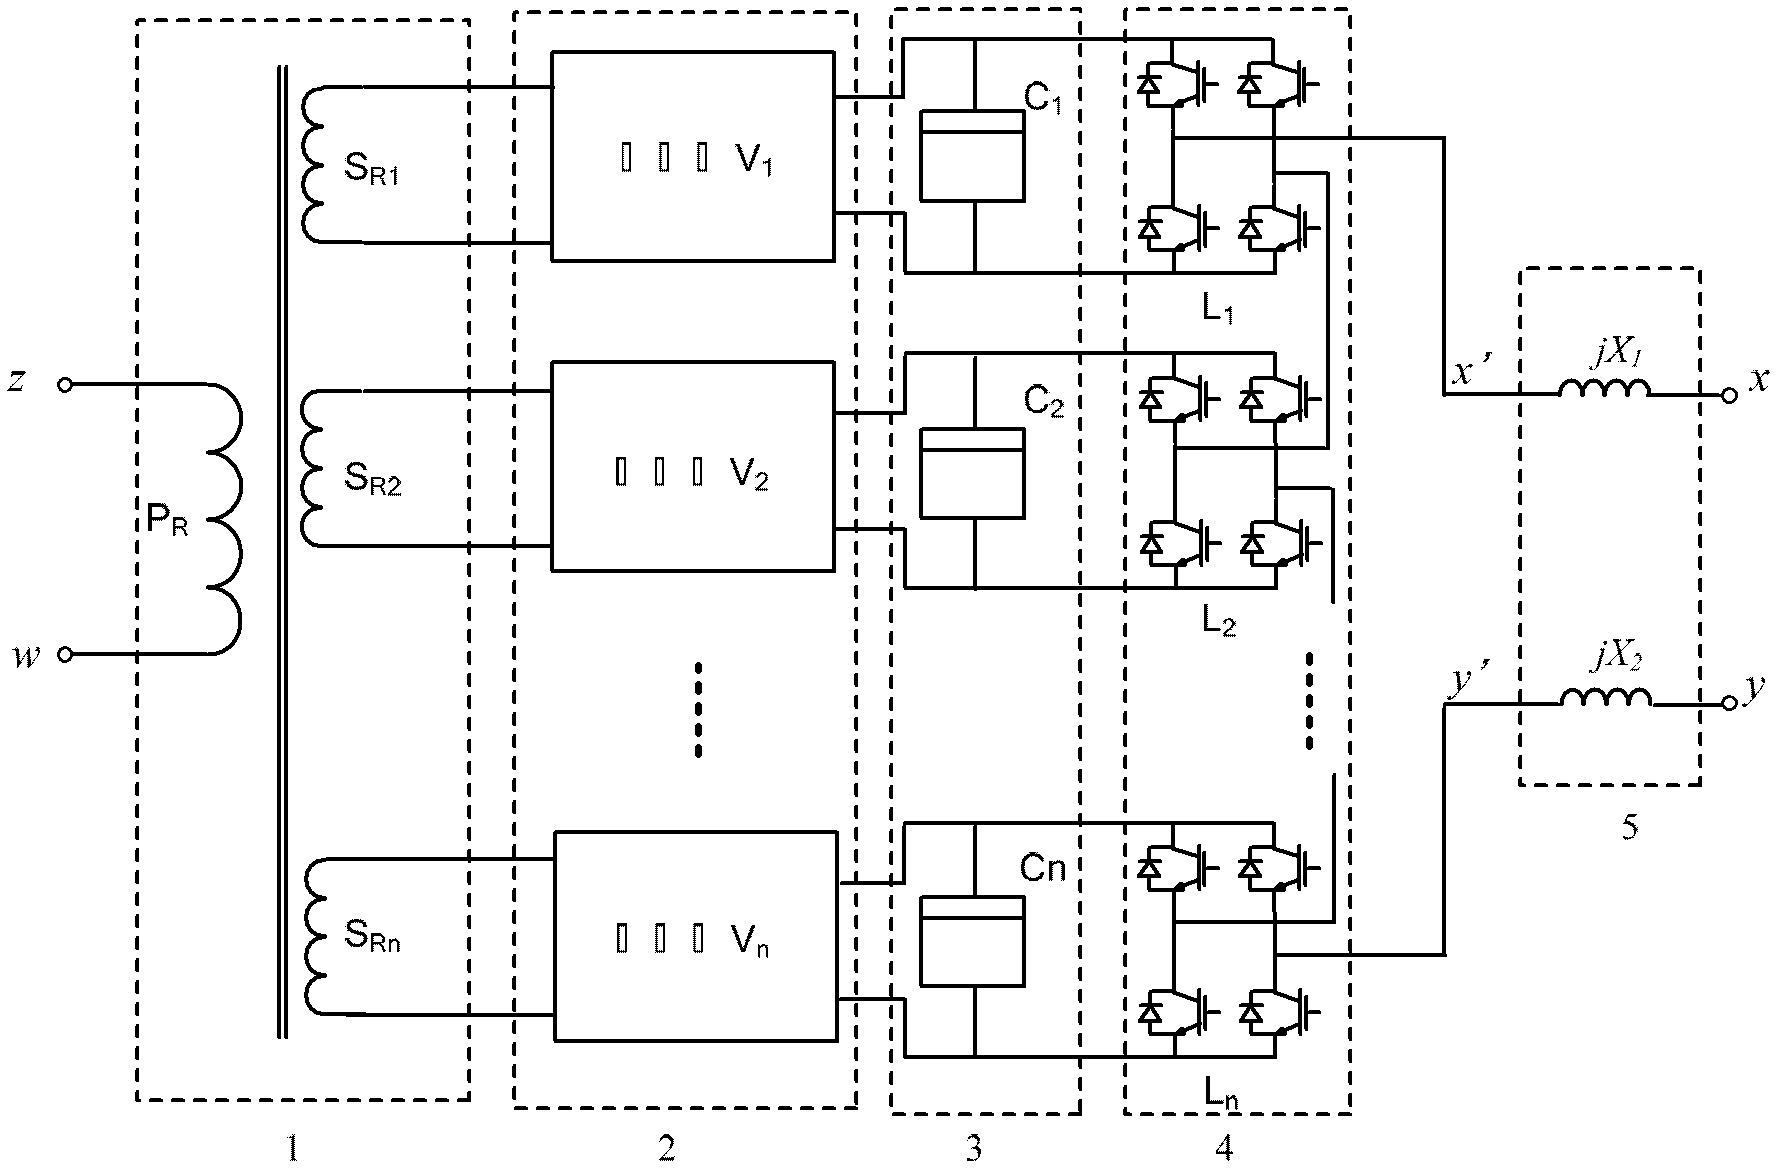 Single-phase electric energy quality controller for electrified railway power supply system